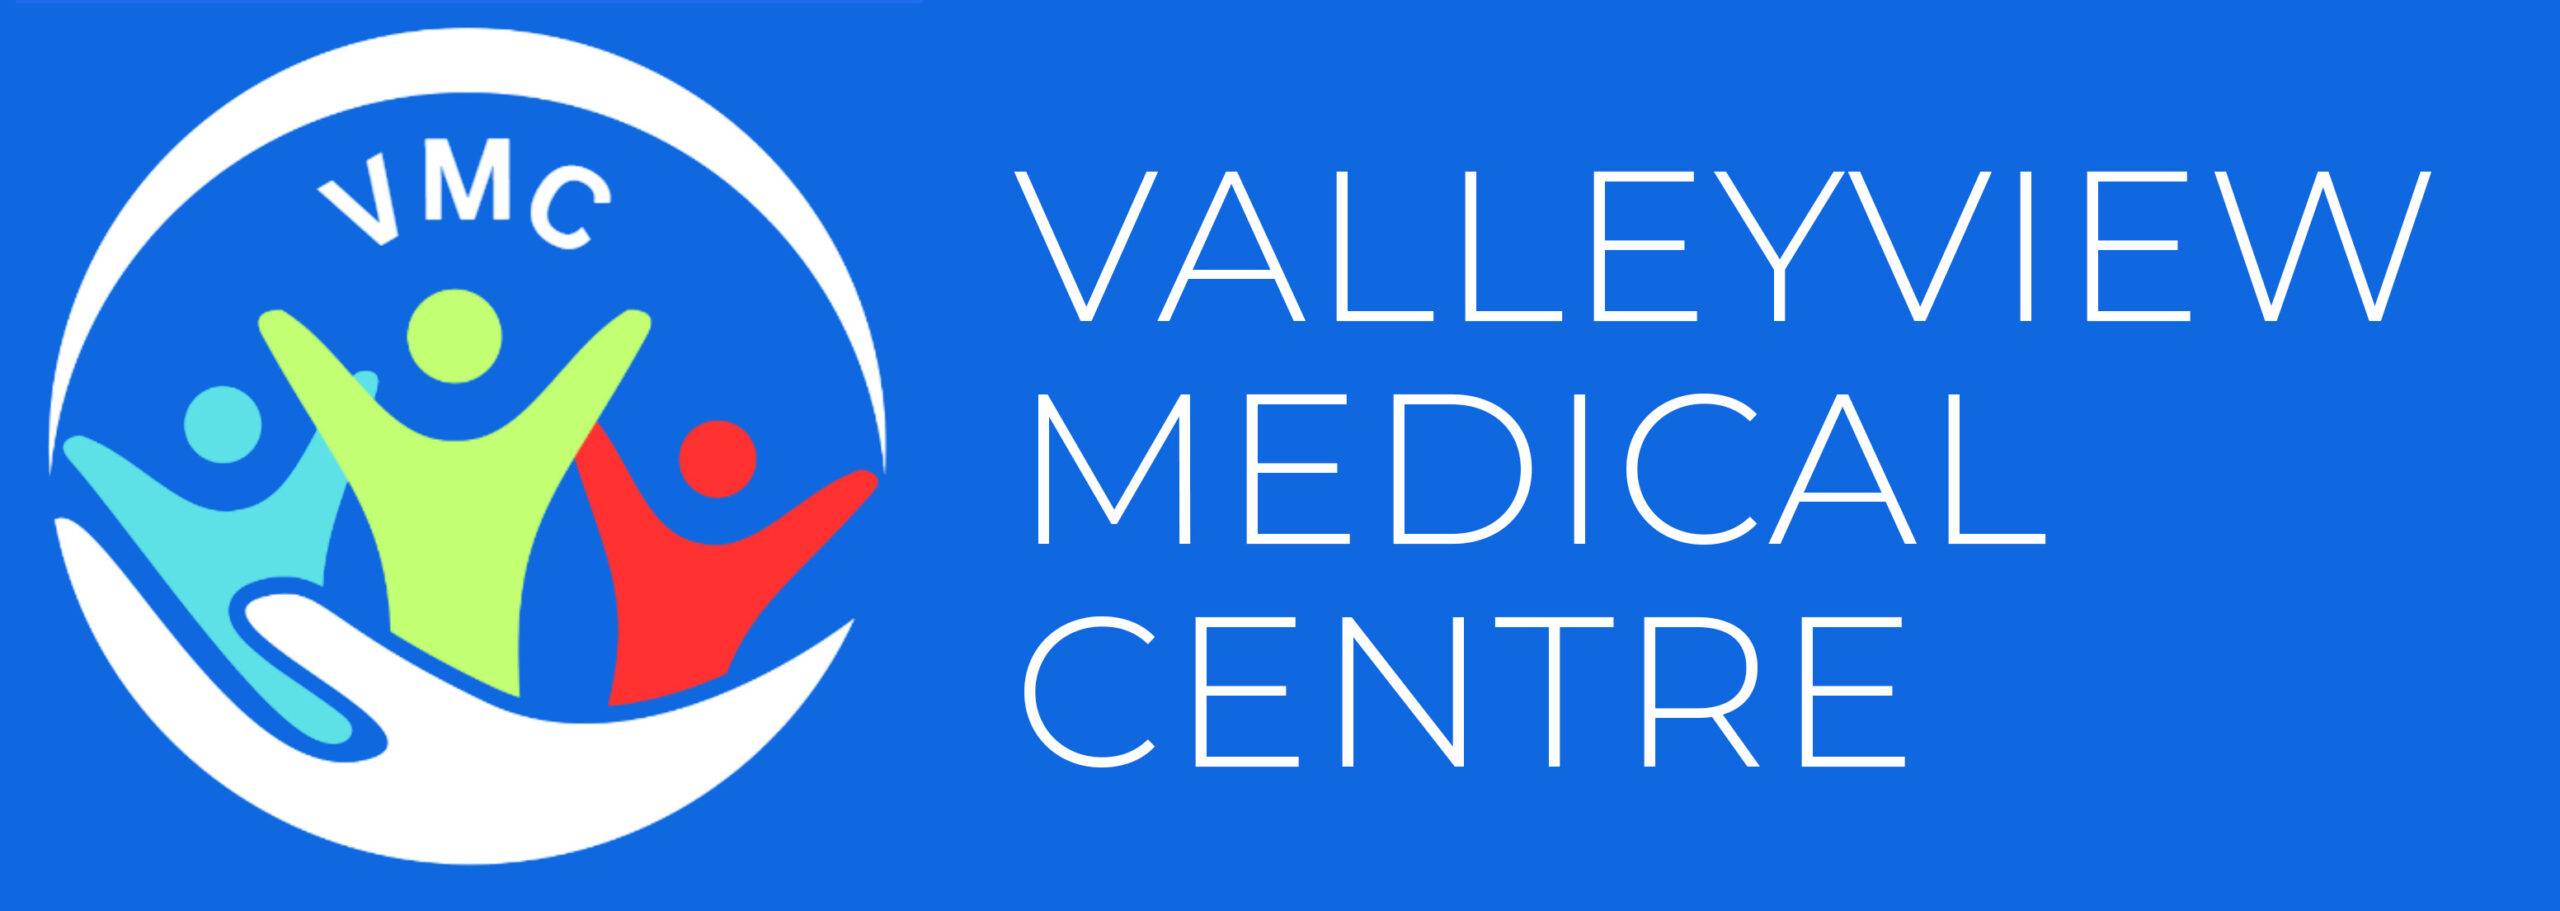 Valleyview Medical Centre